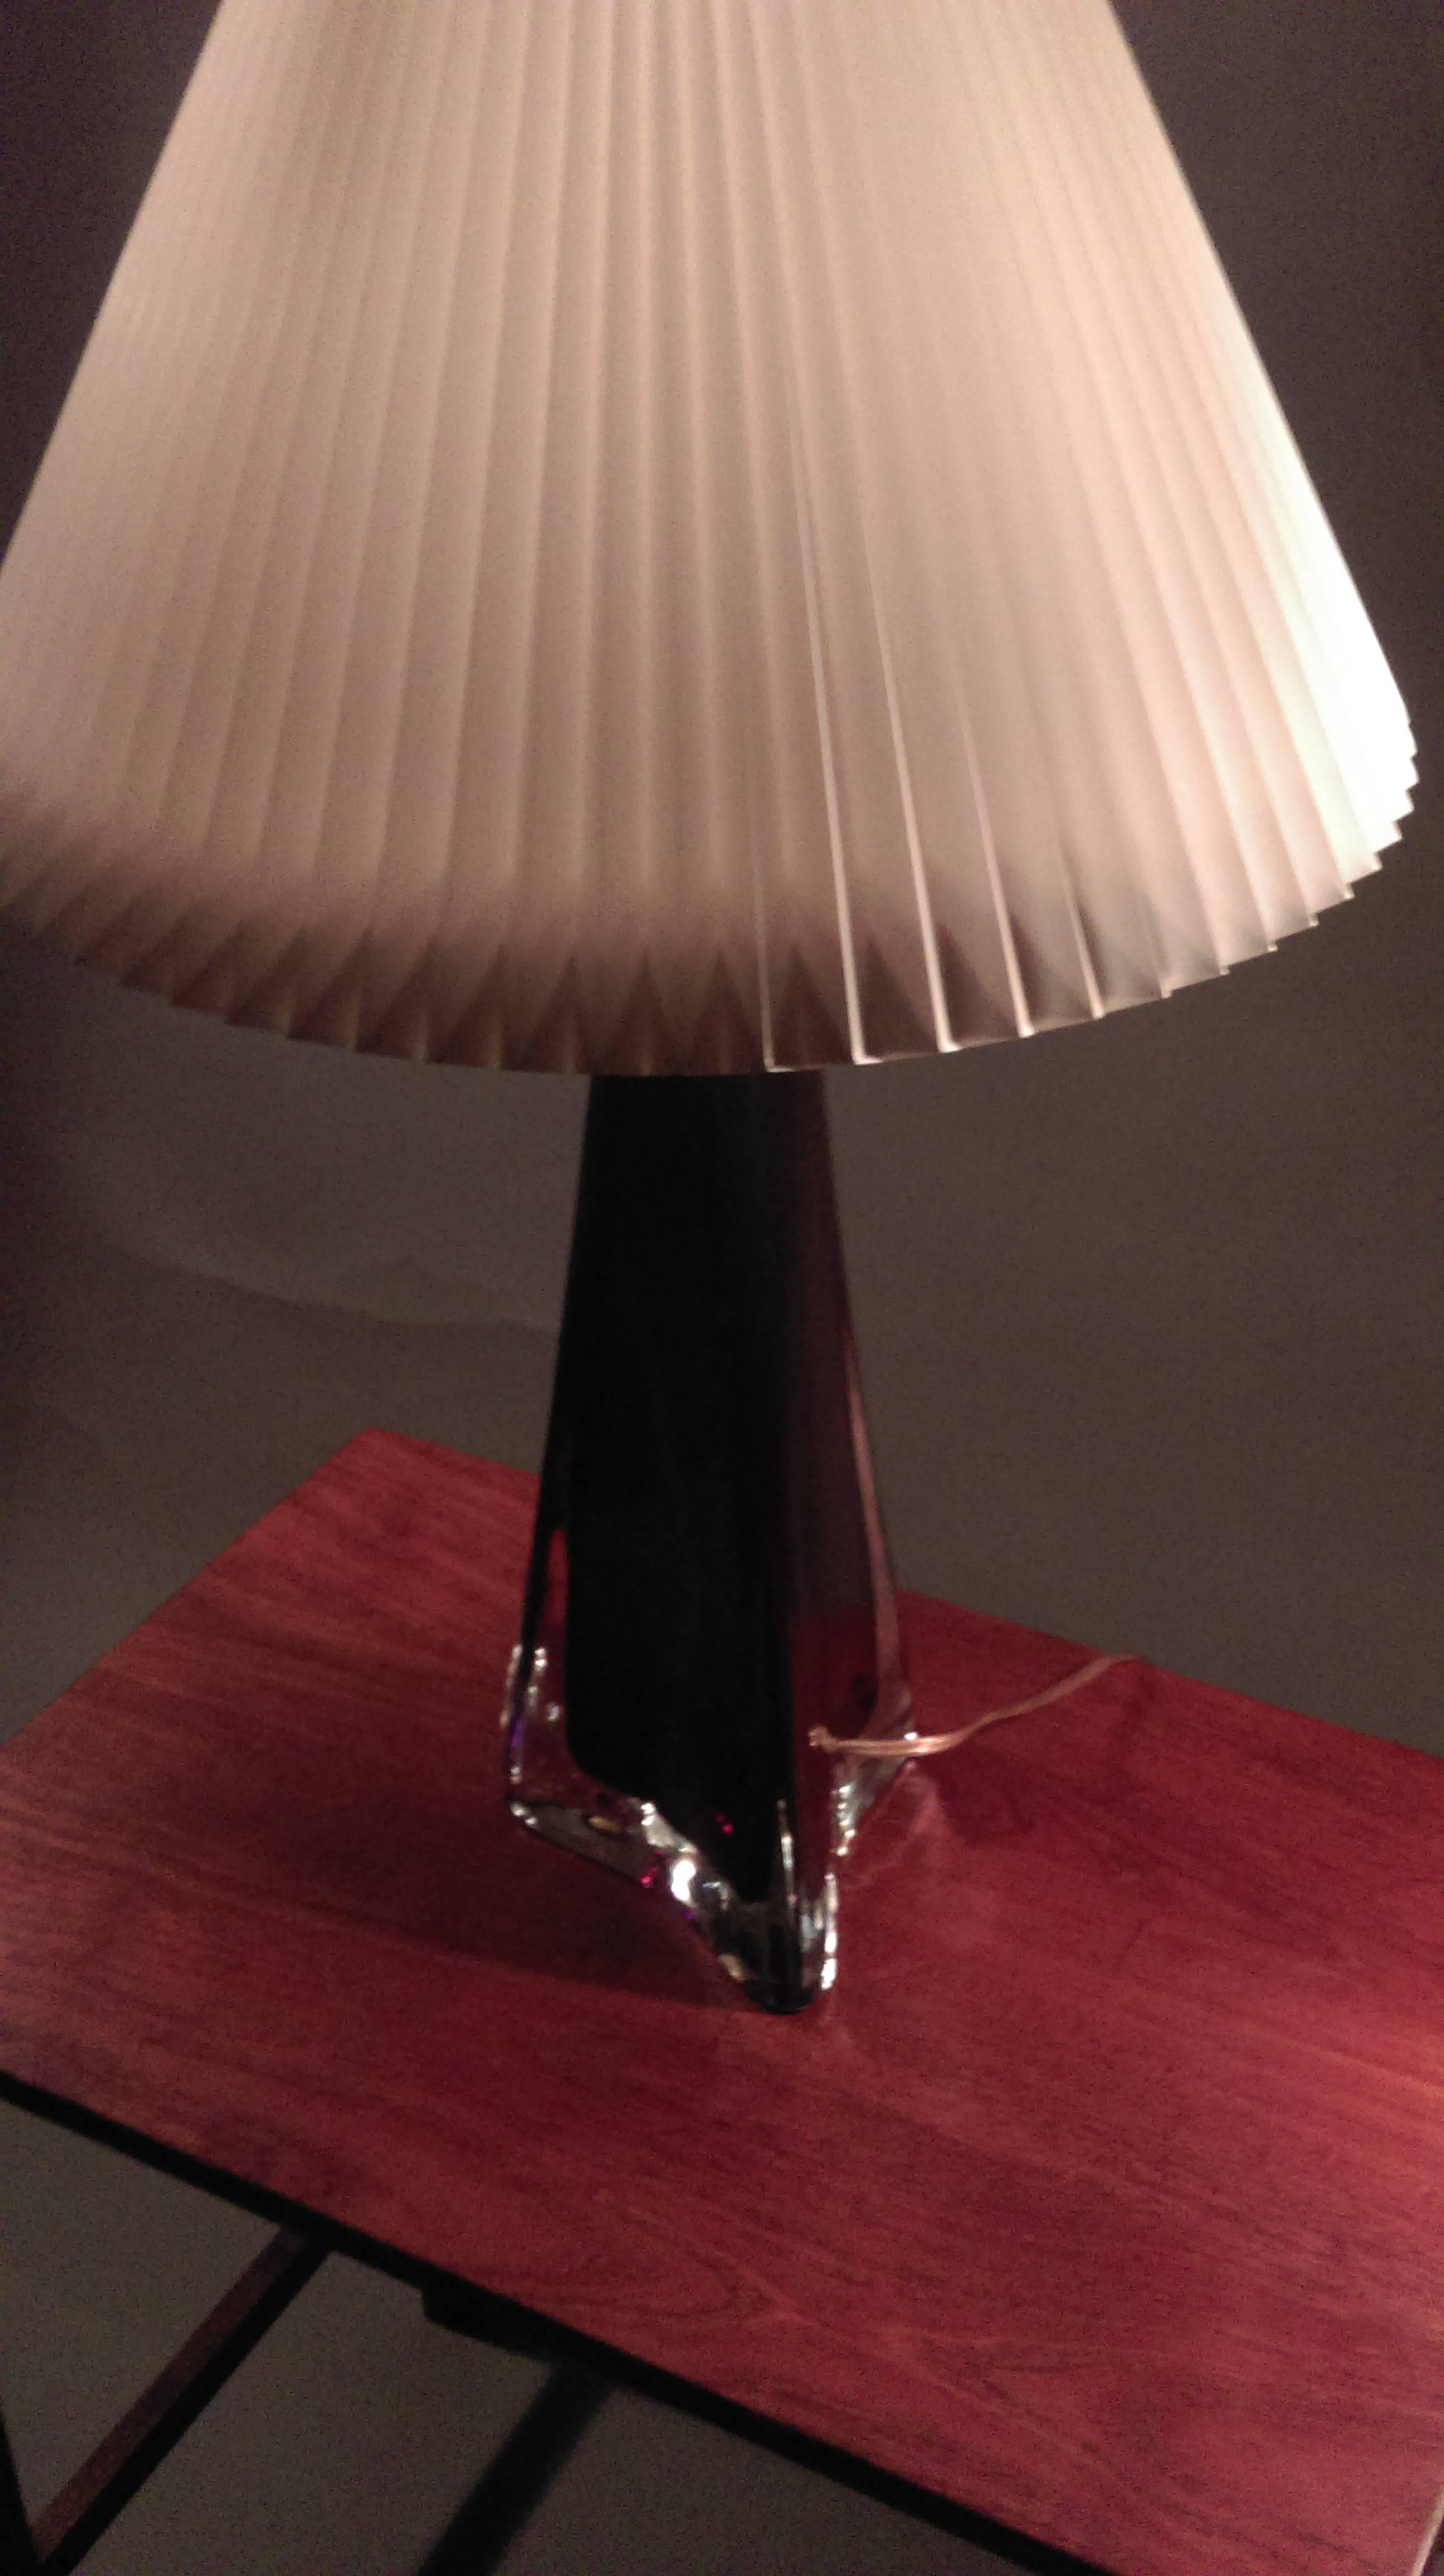 Large classic Carl Fagerlund triangular red and clear glass table lamp by Orrefors with marks on base and assembly.

Measures: Height incl. socket: 45 cm.
Diameter 15 cm.